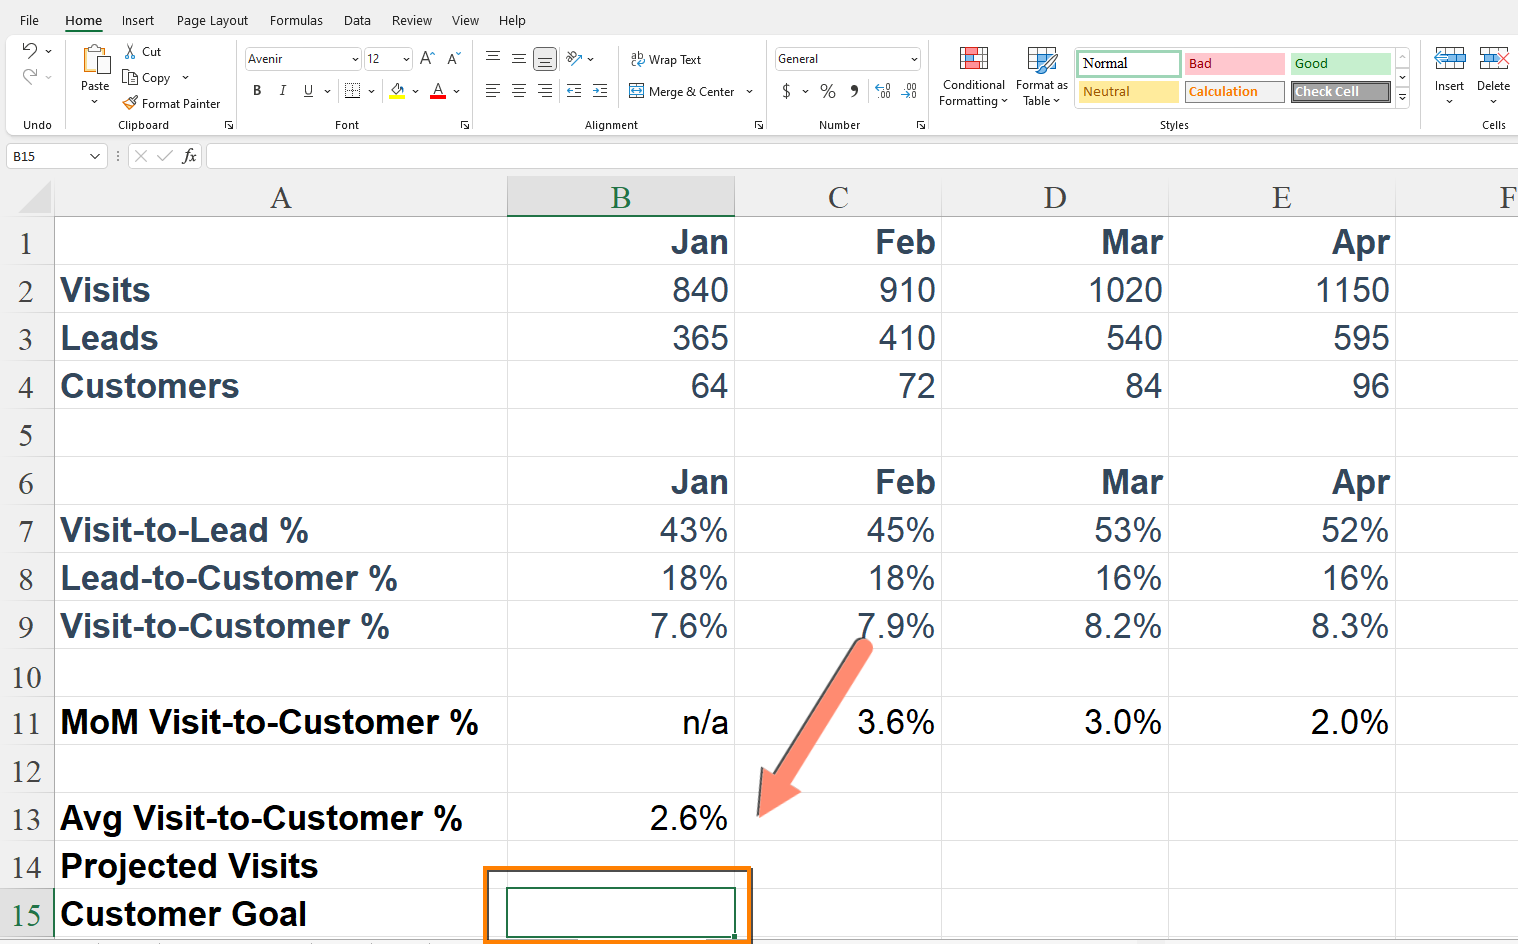 How to use Target Search in Excel: Step 1, select the cell with the output you want to change